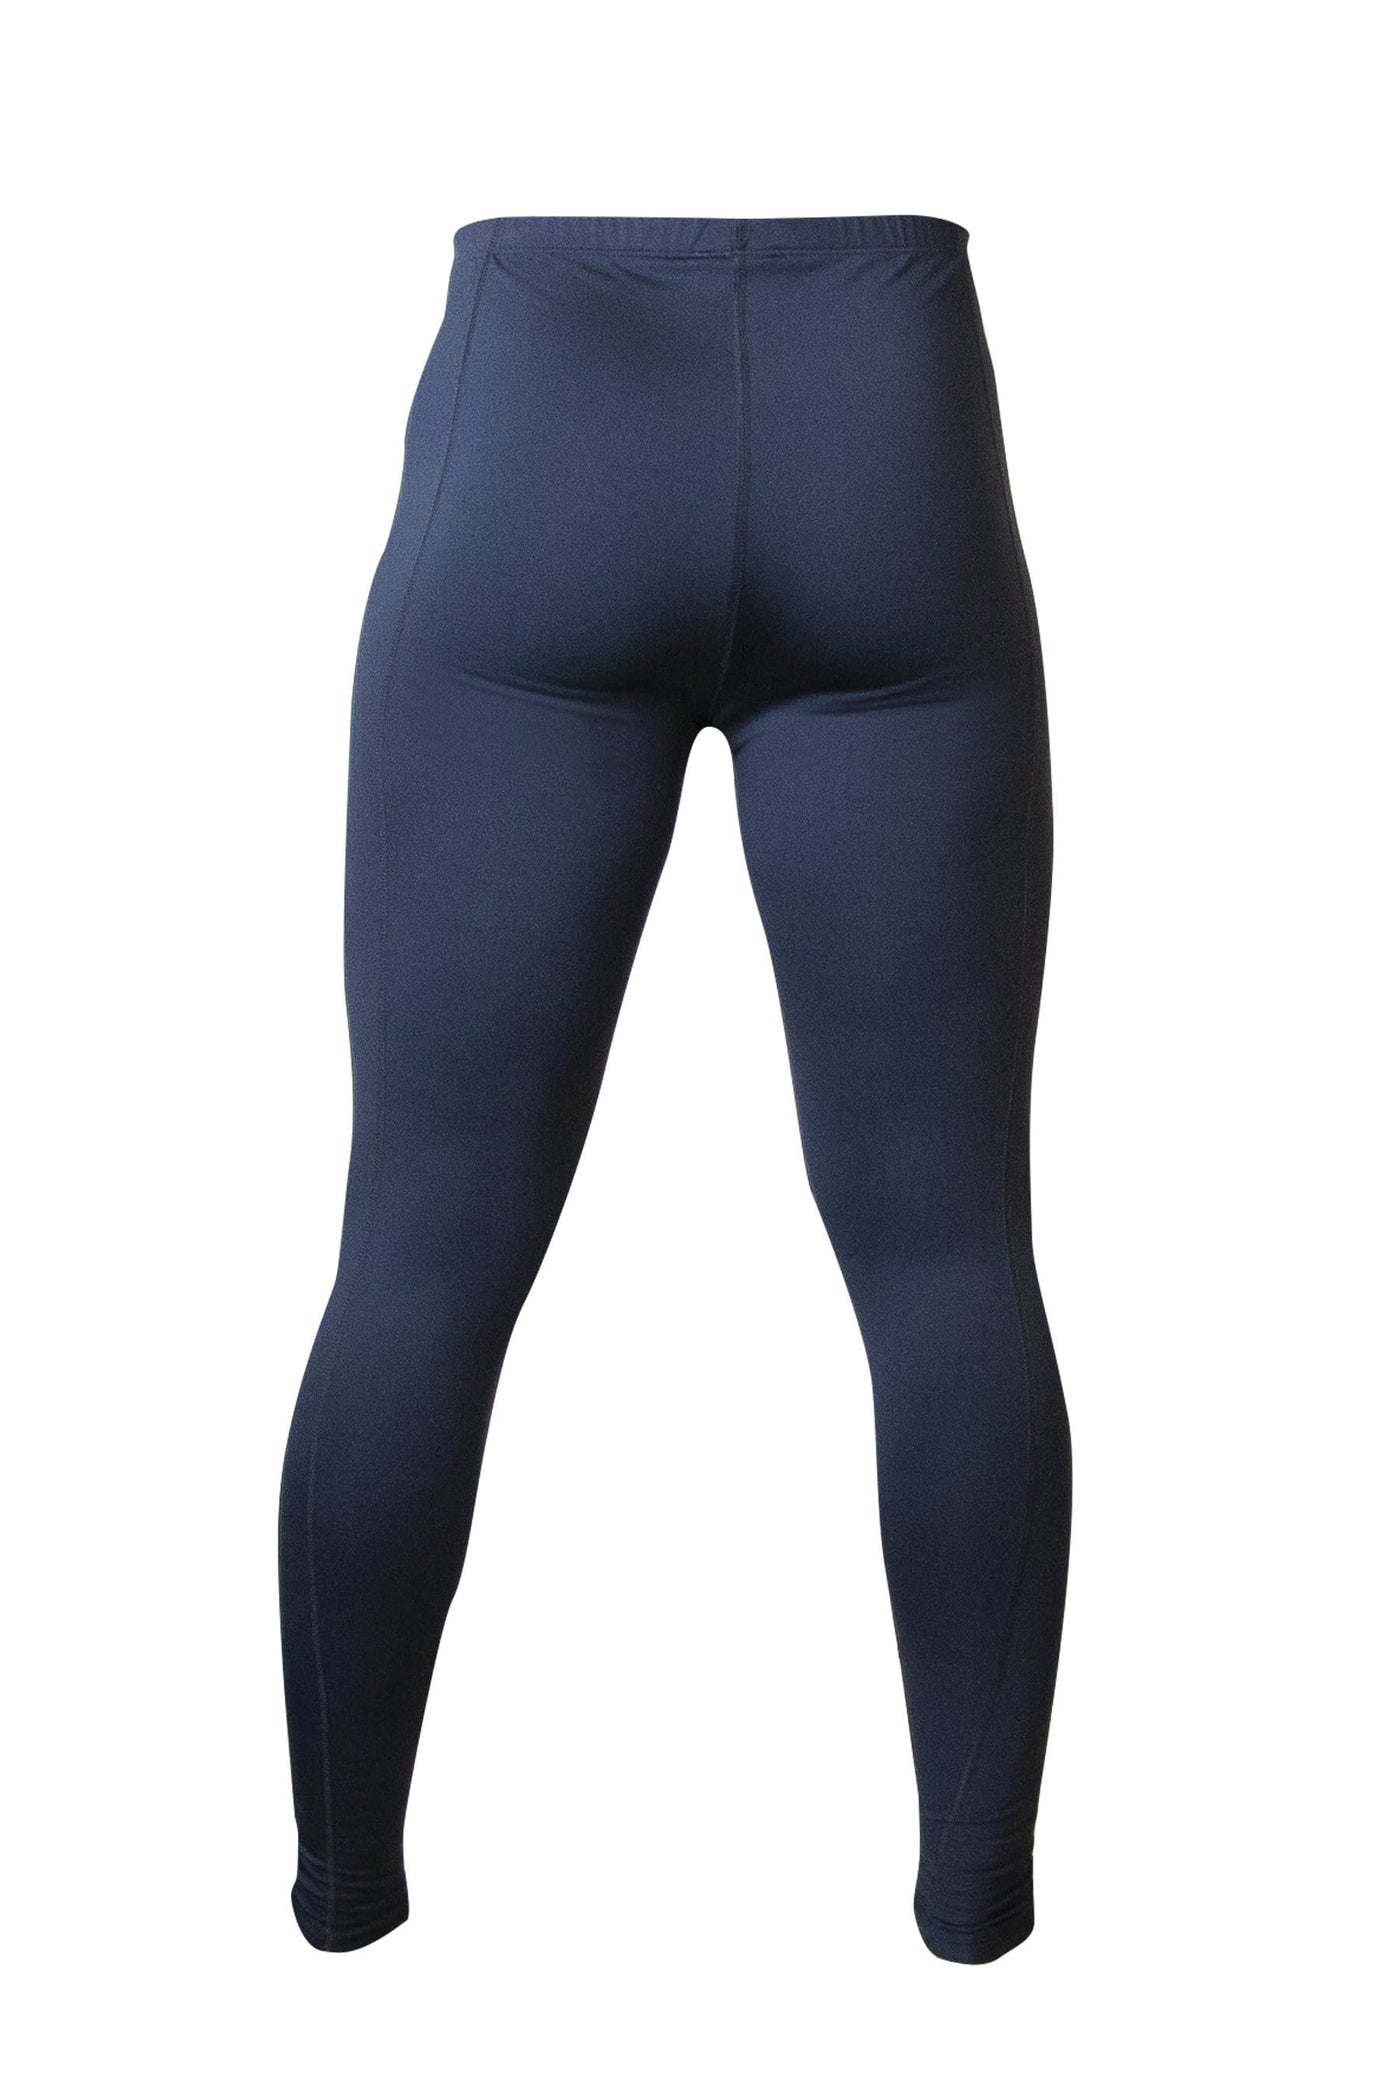 BOATHOUSE Men's Solid Training Tights